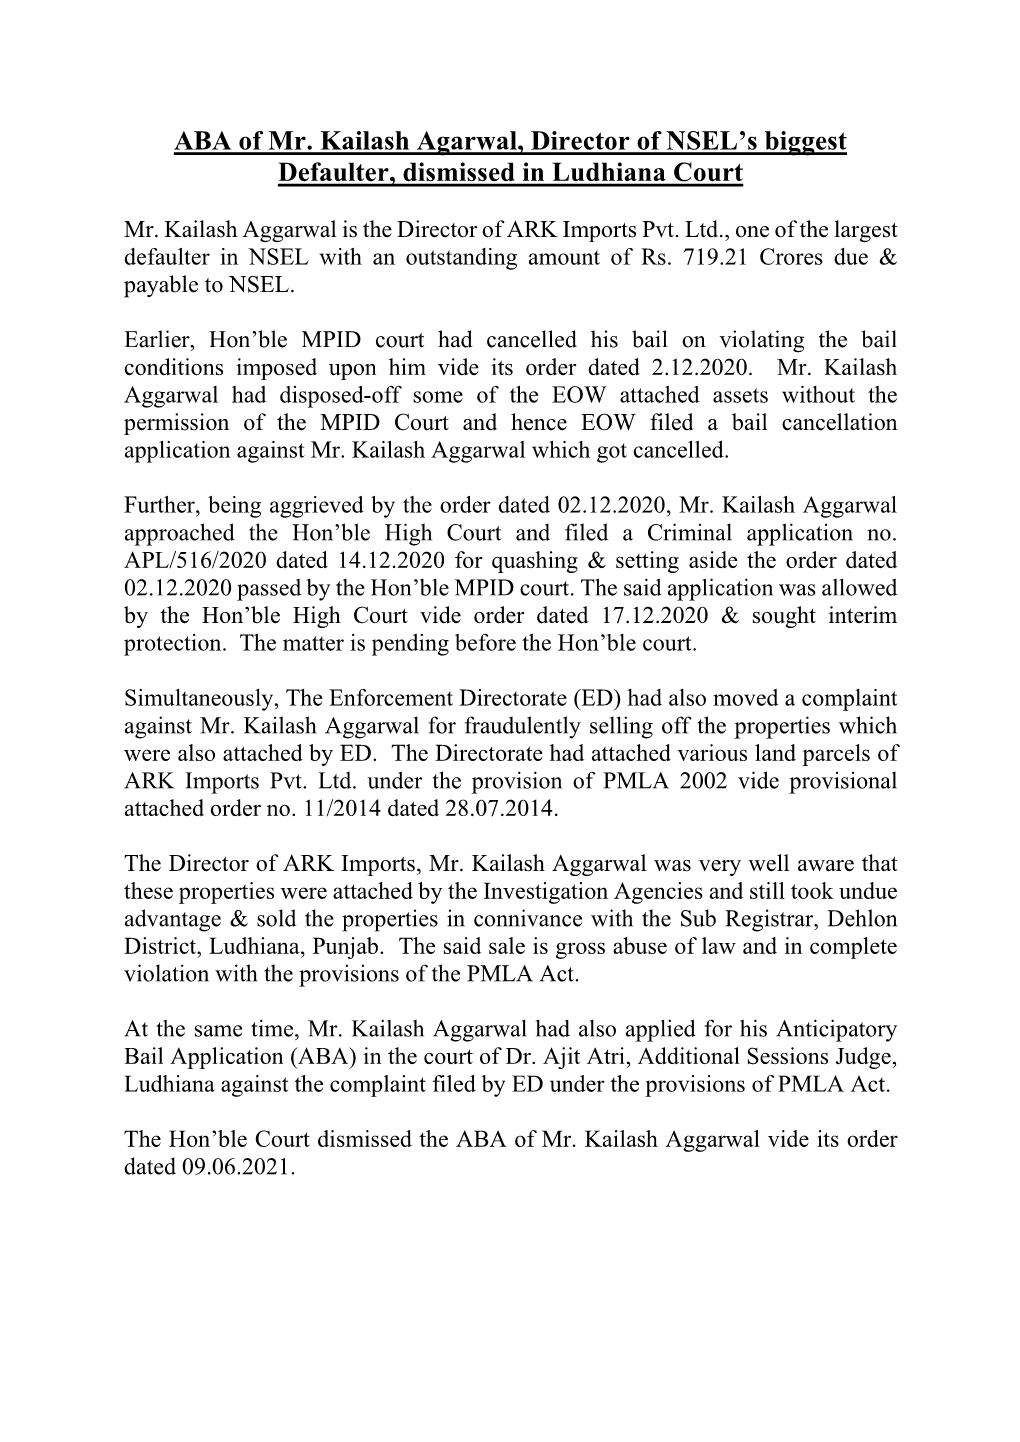 ABA of Mr. Kailash Agarwal, Director of NSEL's Biggest Defaulter